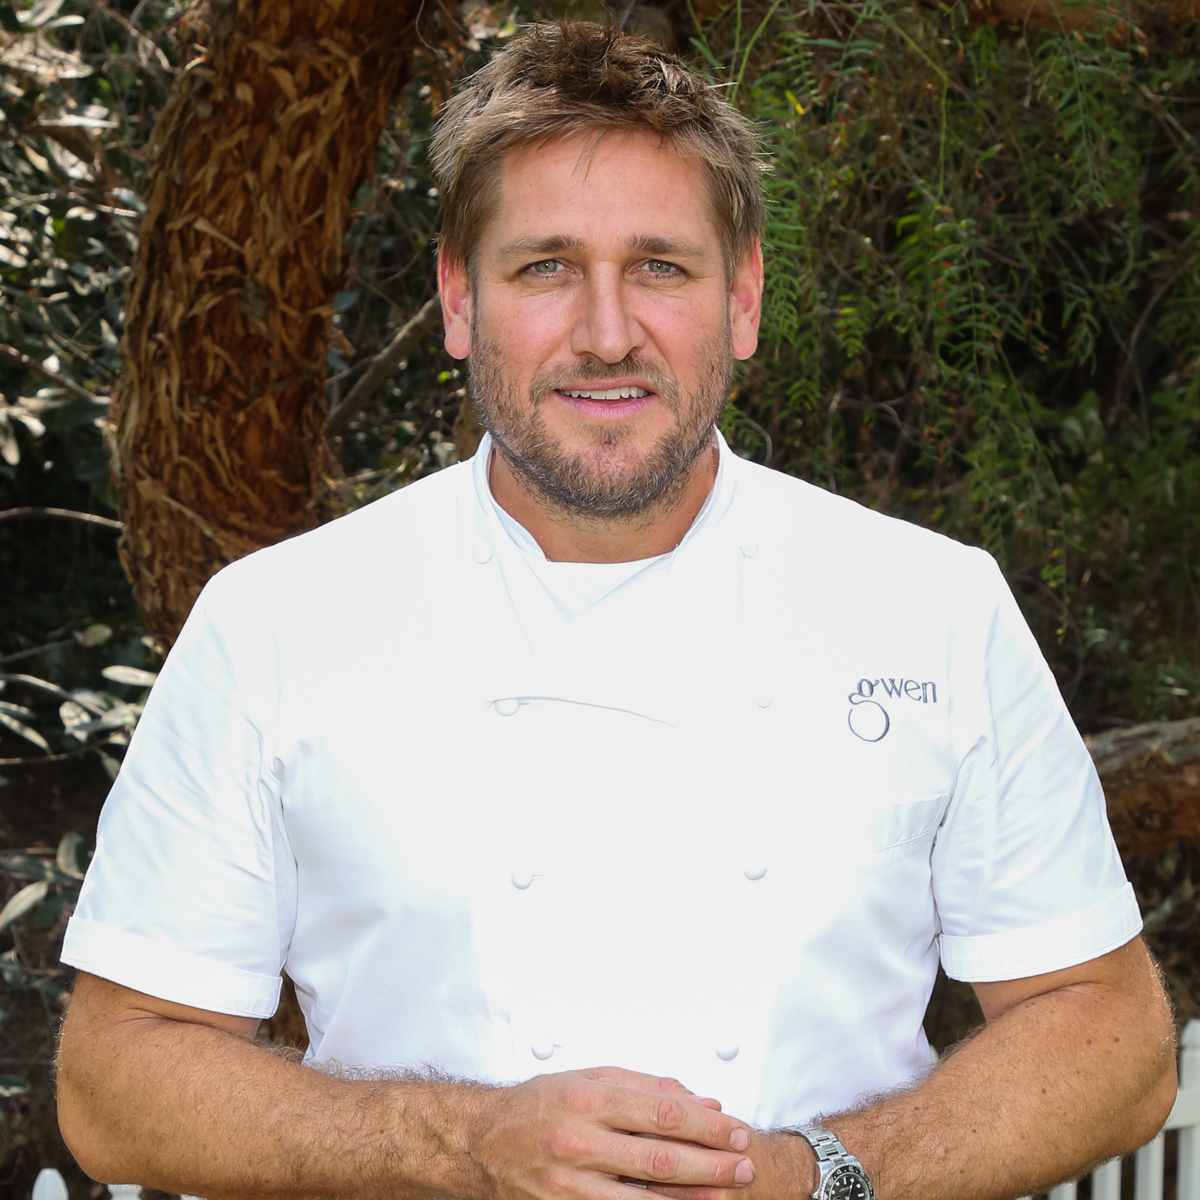 Chef Curtis Stone Interview